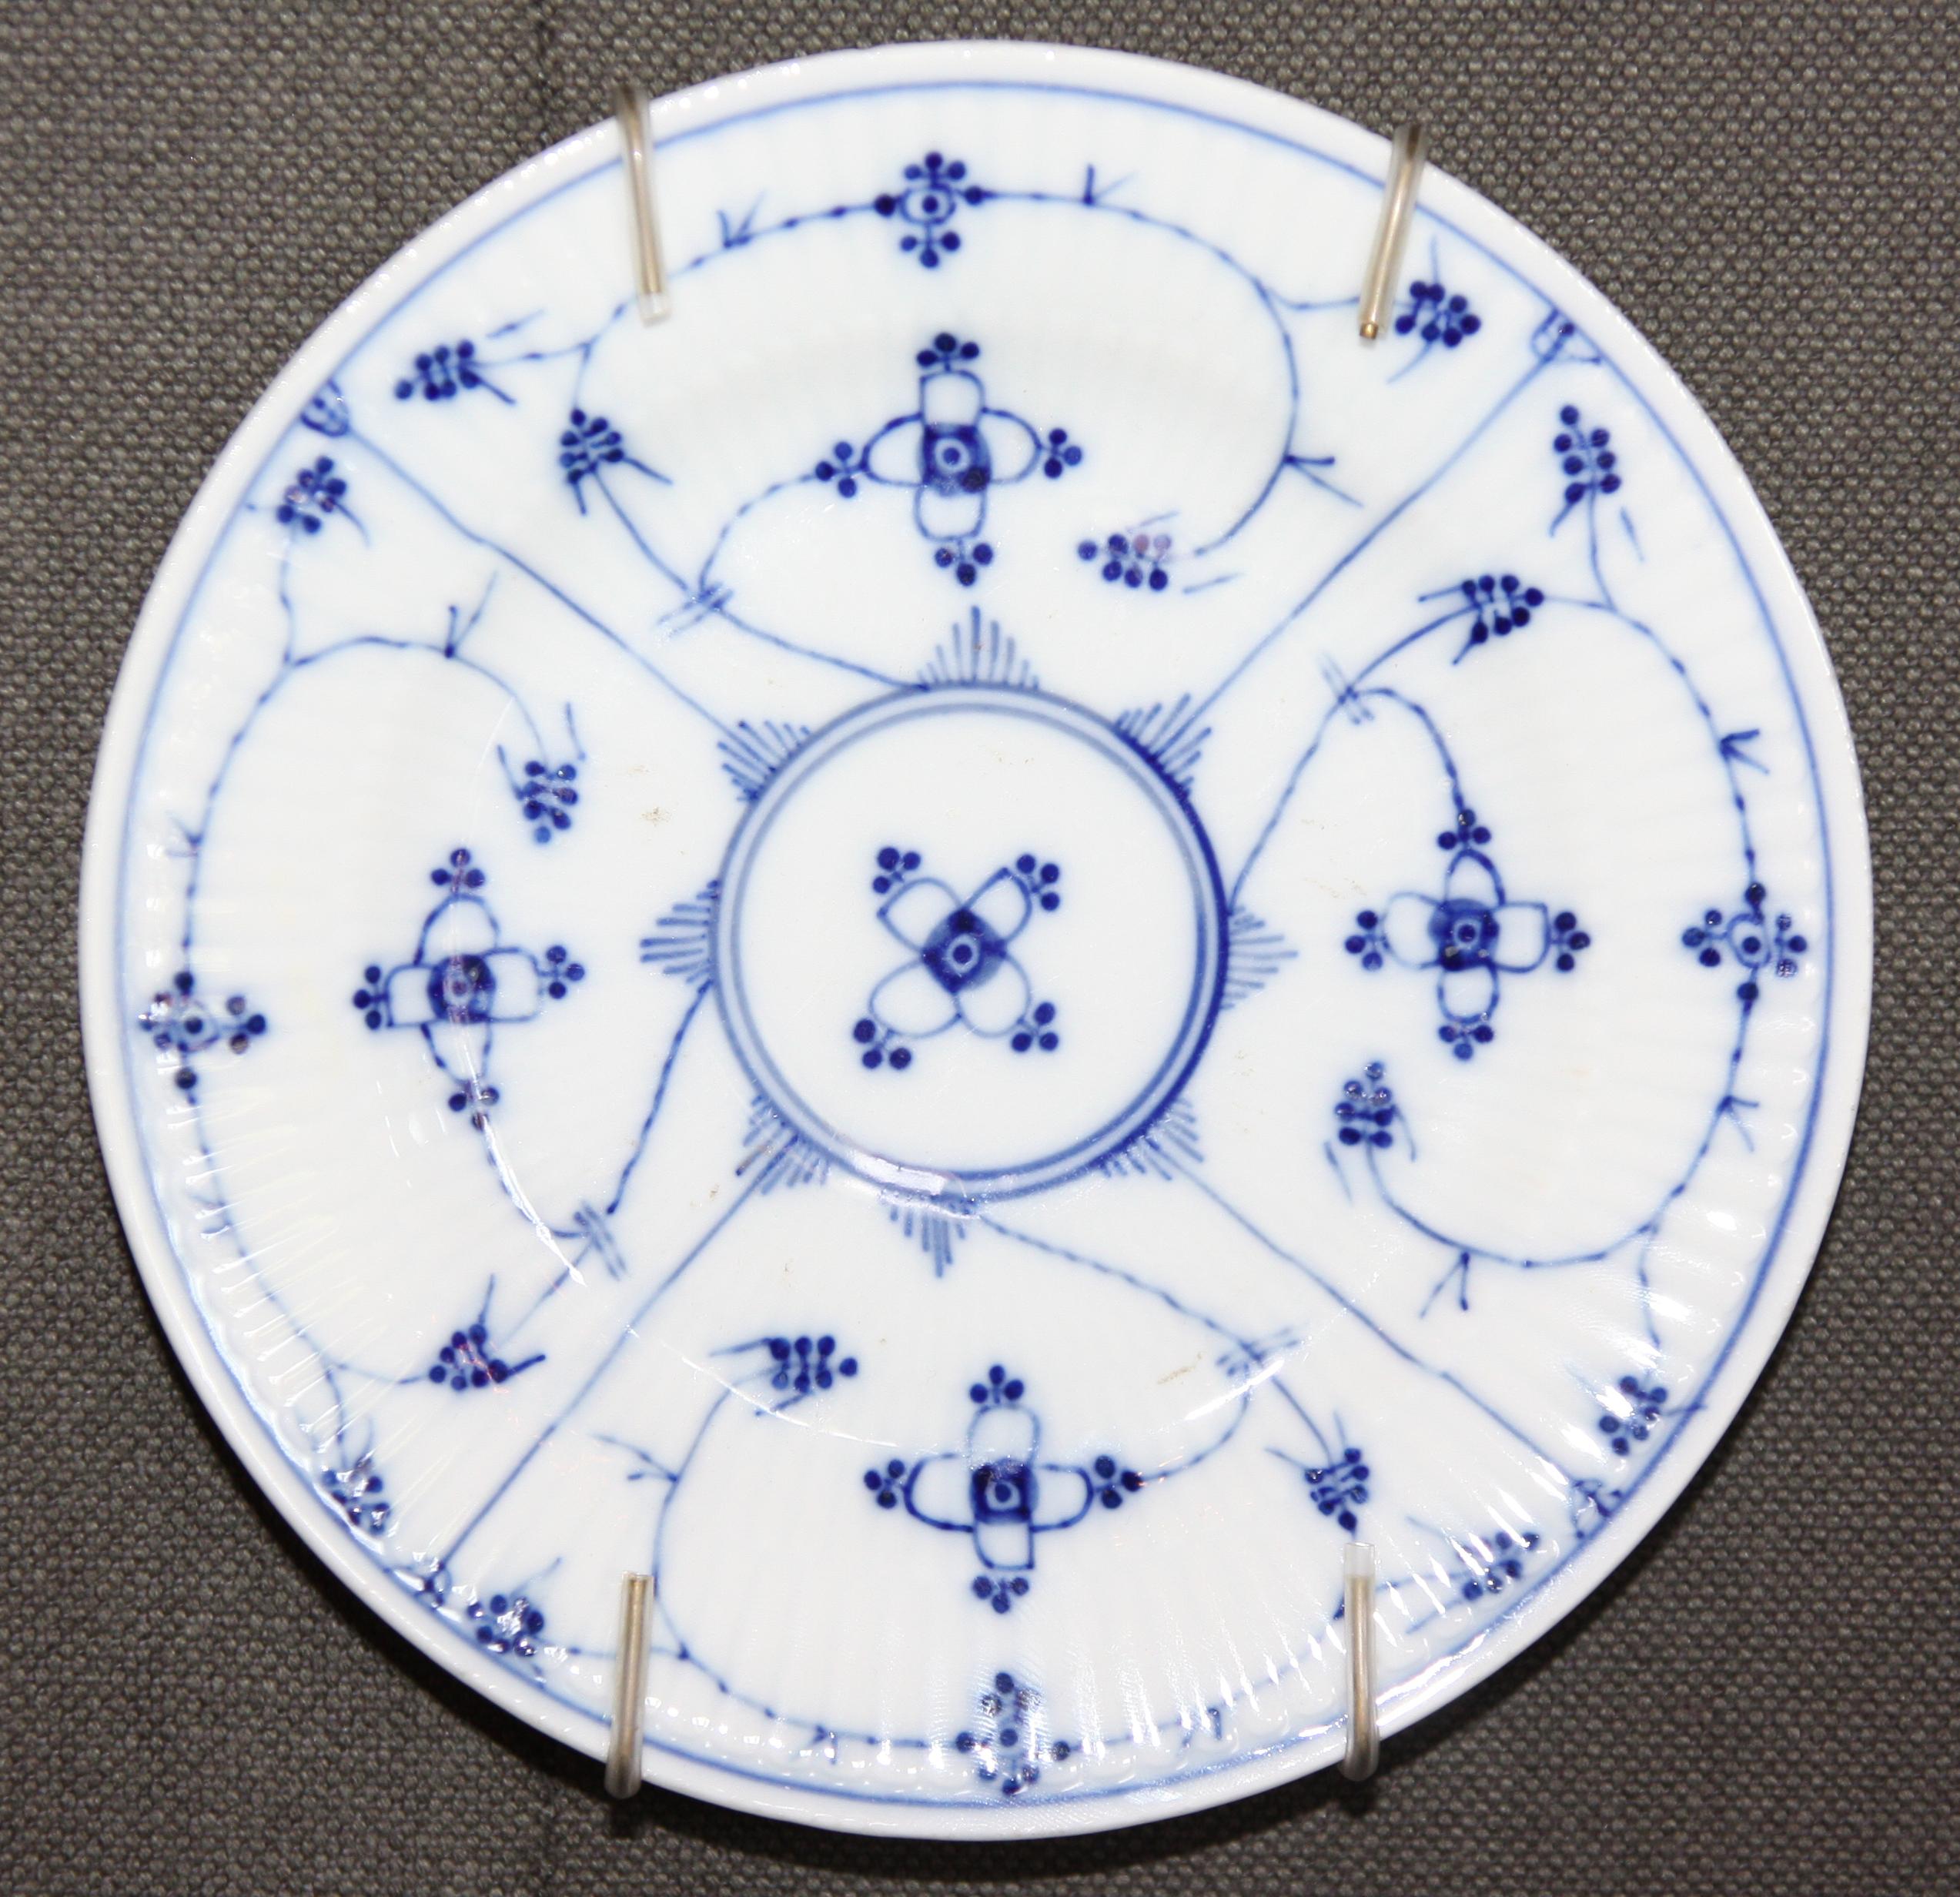 Chinese Export Collection of 31 Hand Painted Blue and White Porcelain Plates 